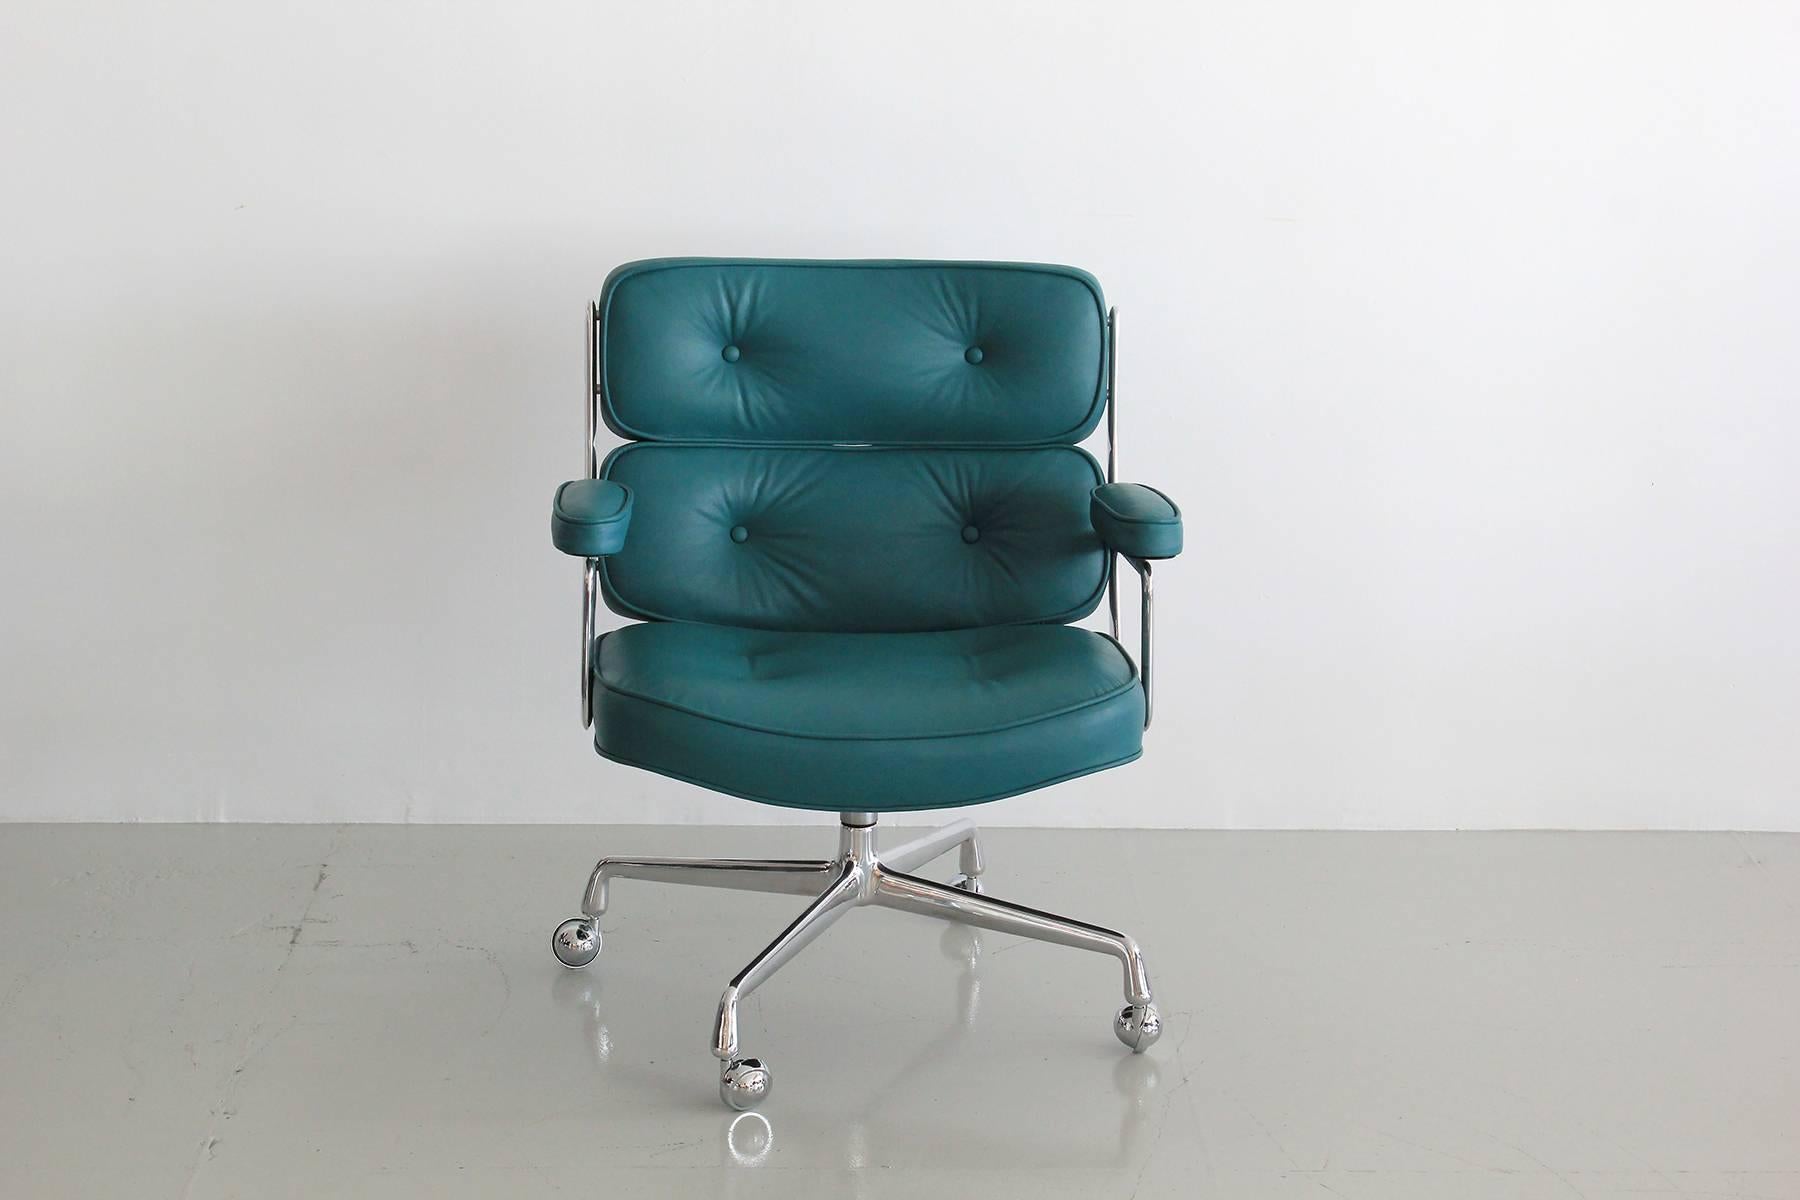 Classic office chair from the Time Life building in New York. New teal blue leather upholstery along with newly polished aluminum base and casters. Chair has an adjustable height with tilt and swivel. Multiple chairs available. Can be COL or COM.